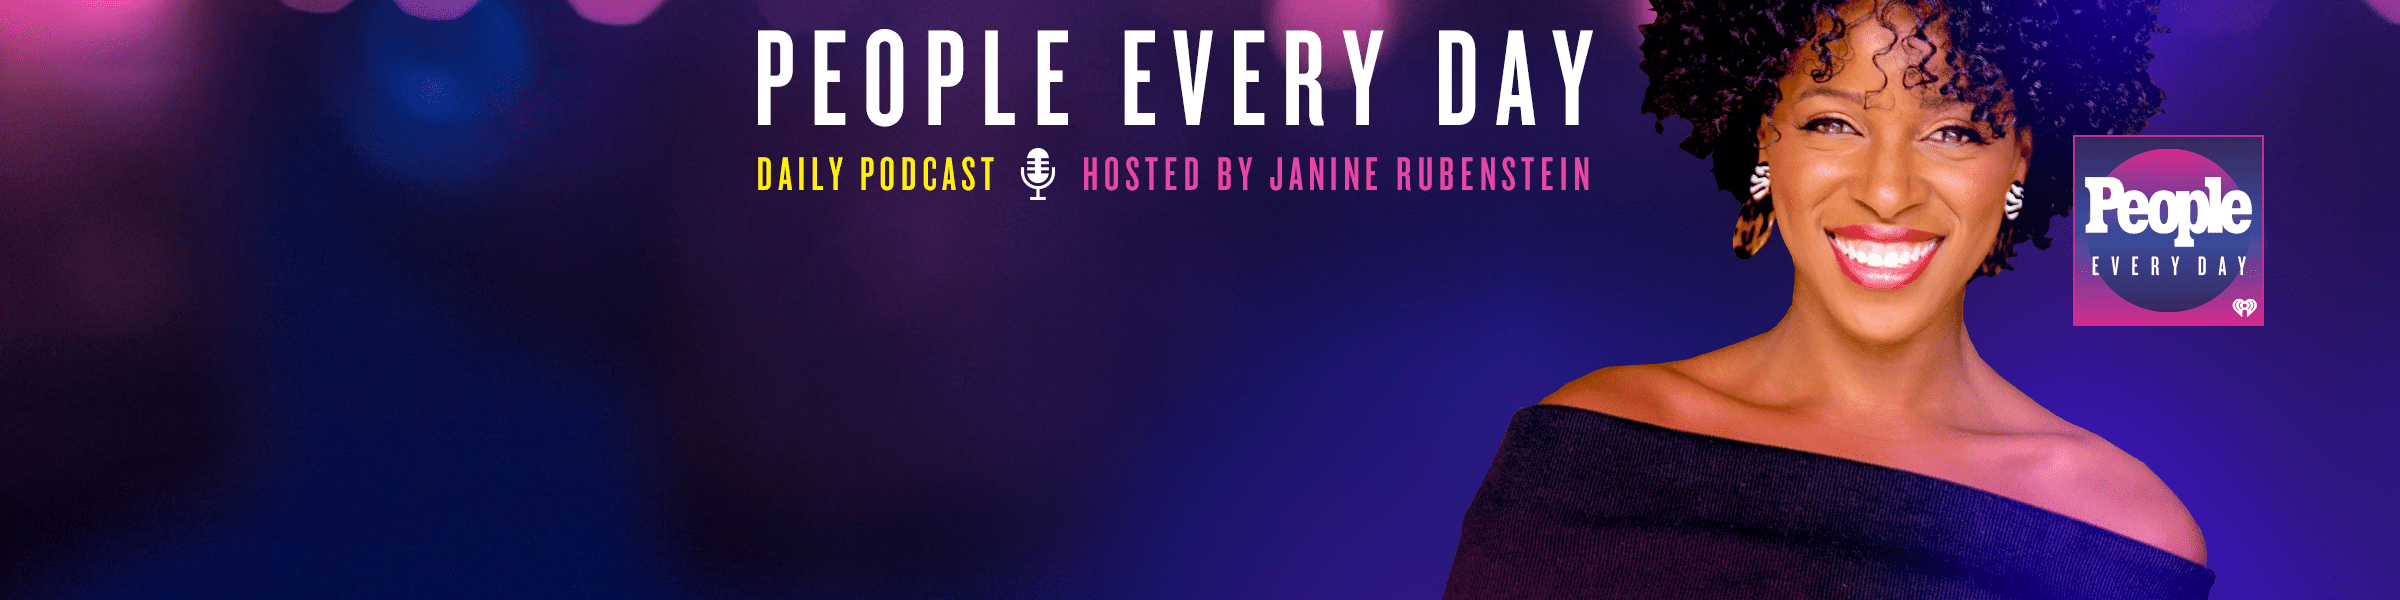 People Every Day Podcast Header